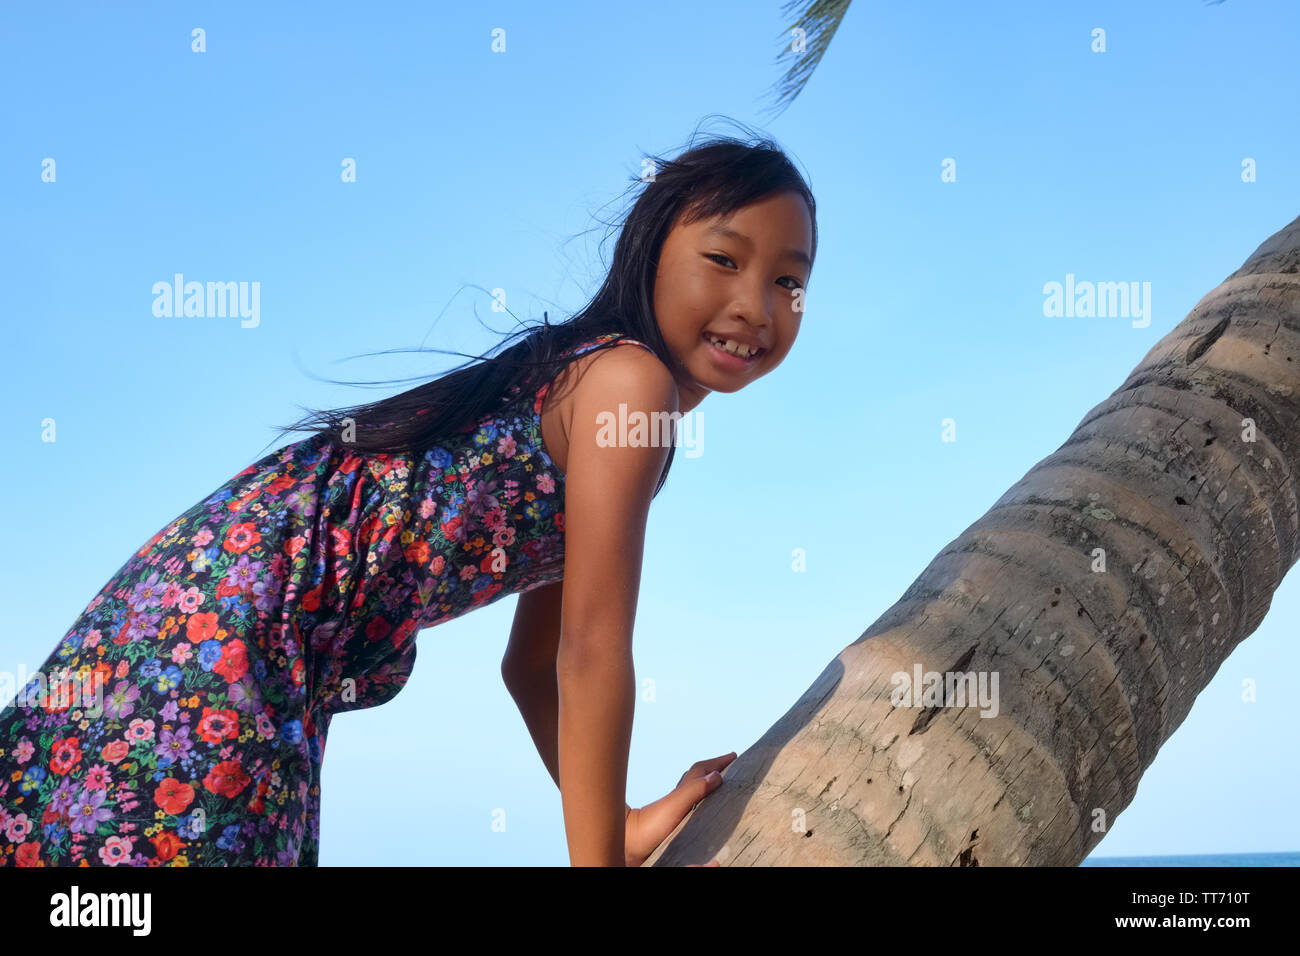 A young girl by the seaside in Southern Thailand climbing a coconut tree and posing for the camera Stock Photo